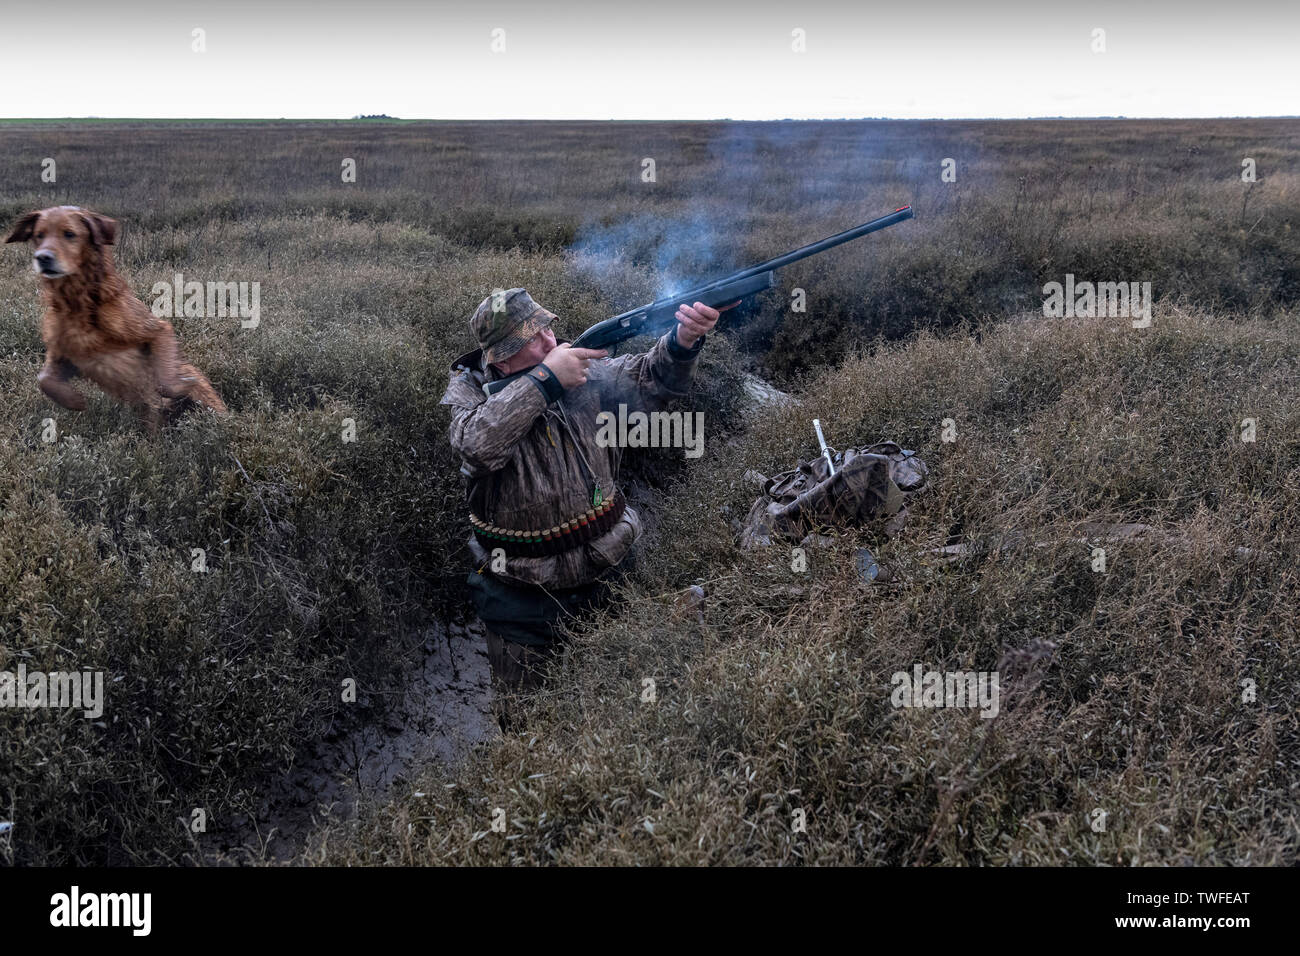 Wildfowling on the Lincolnshire Wash with the shooter taking a shot with retrieving gundog on the marshes with storm clouds and rain. Stock Photo